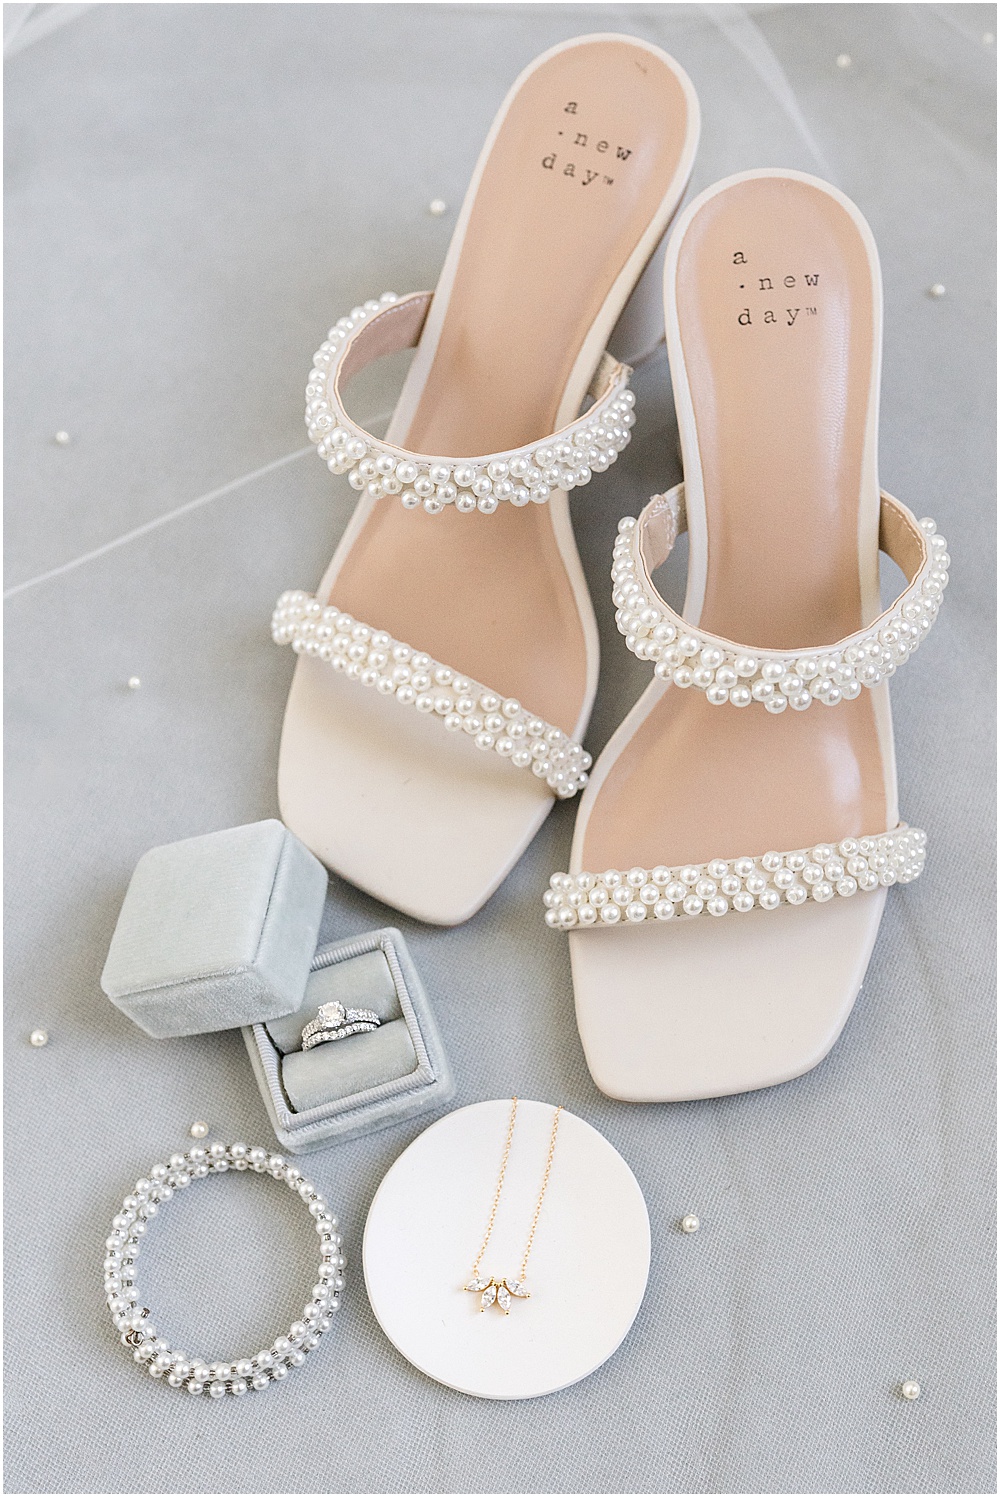 Bride's pearl wedding shoes, ring, and jewelry for at-home, brunch wedding in Westfield, Indiana